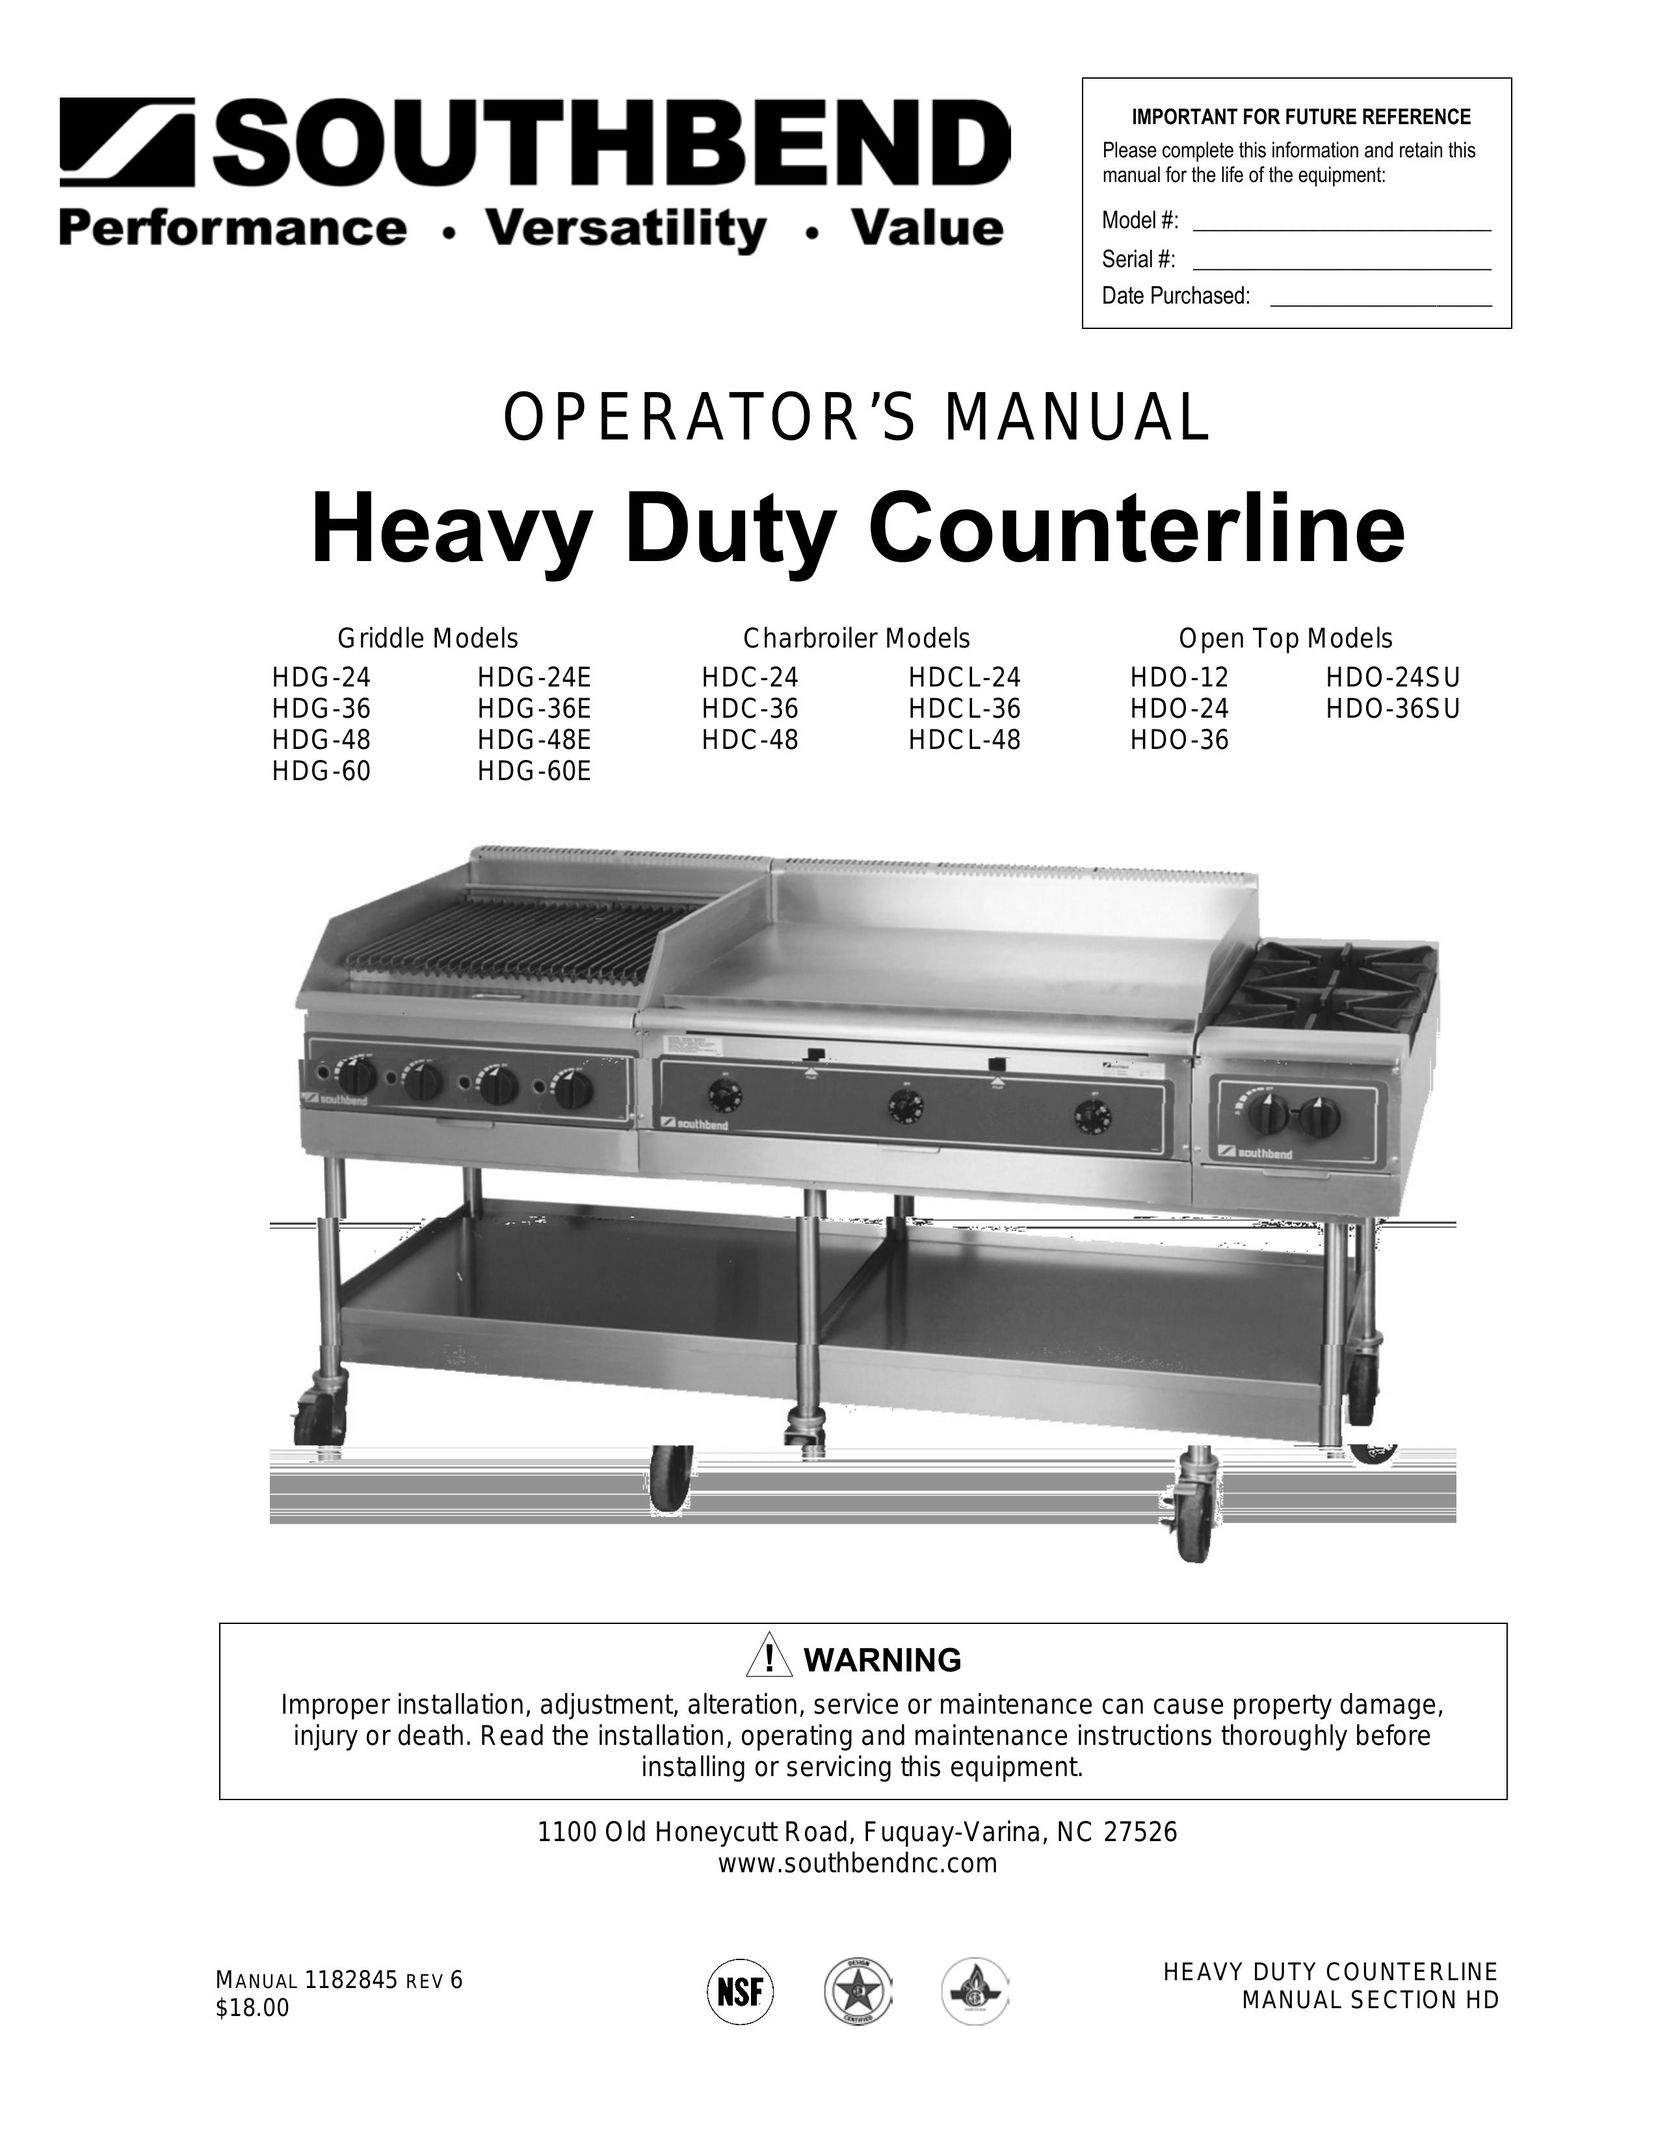 Southbend HDC-24 Cooktop User Manual